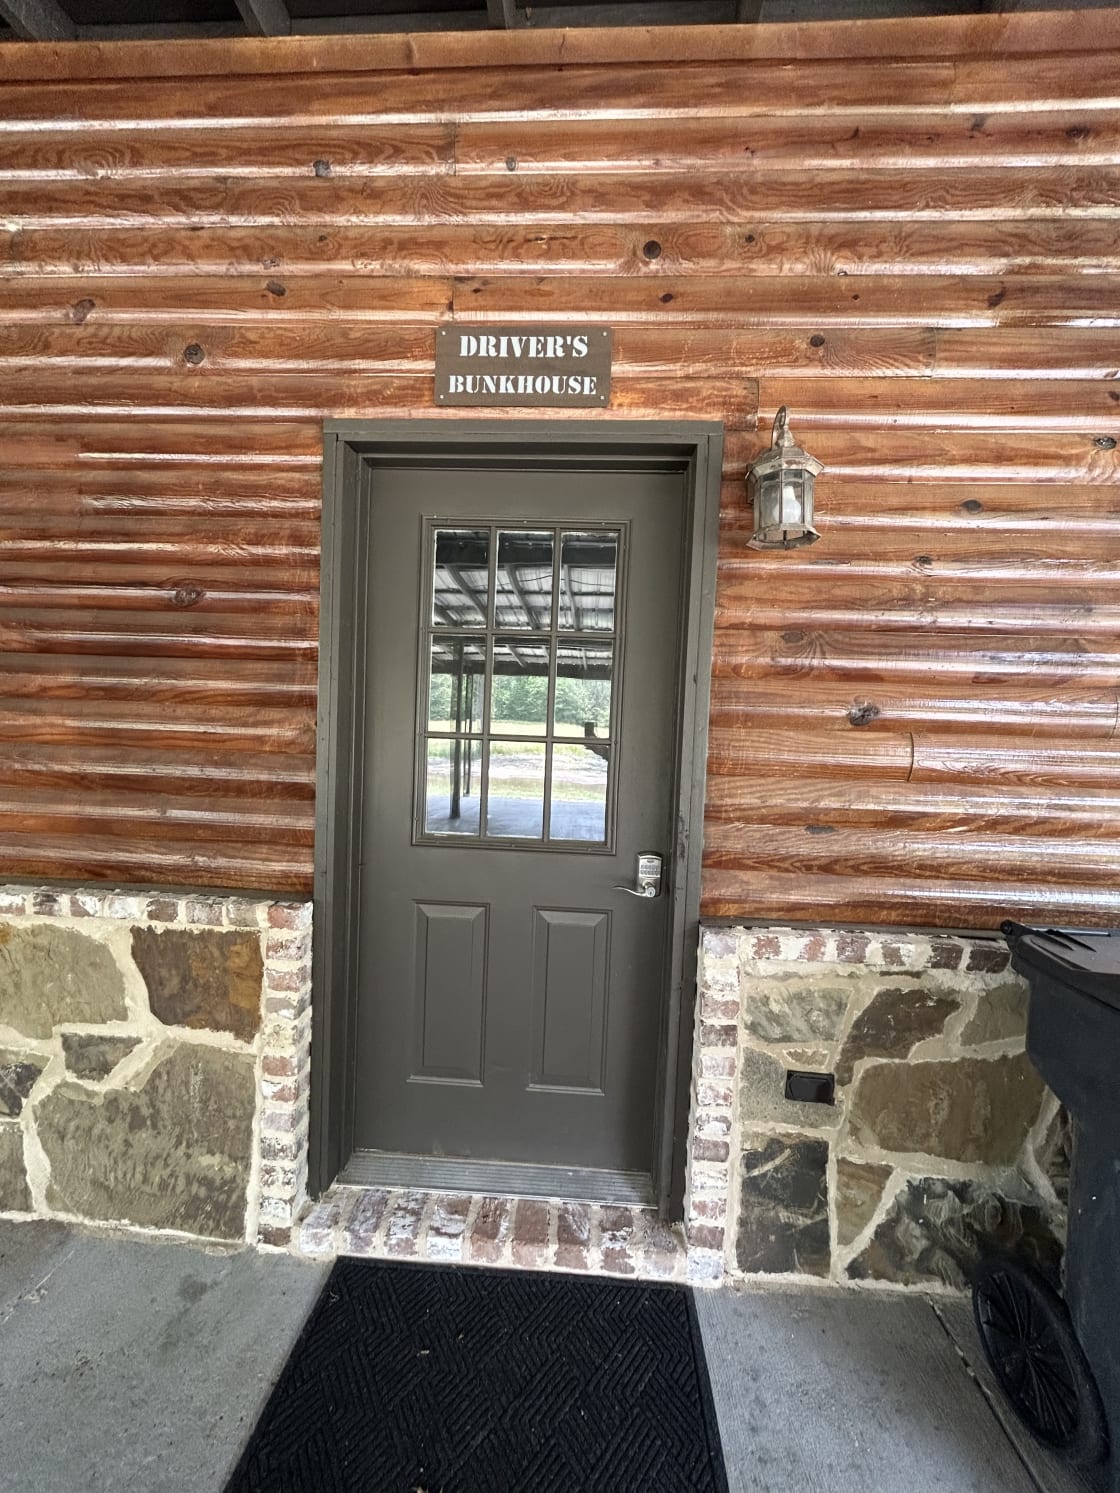 Entrance to the Bunkhouse